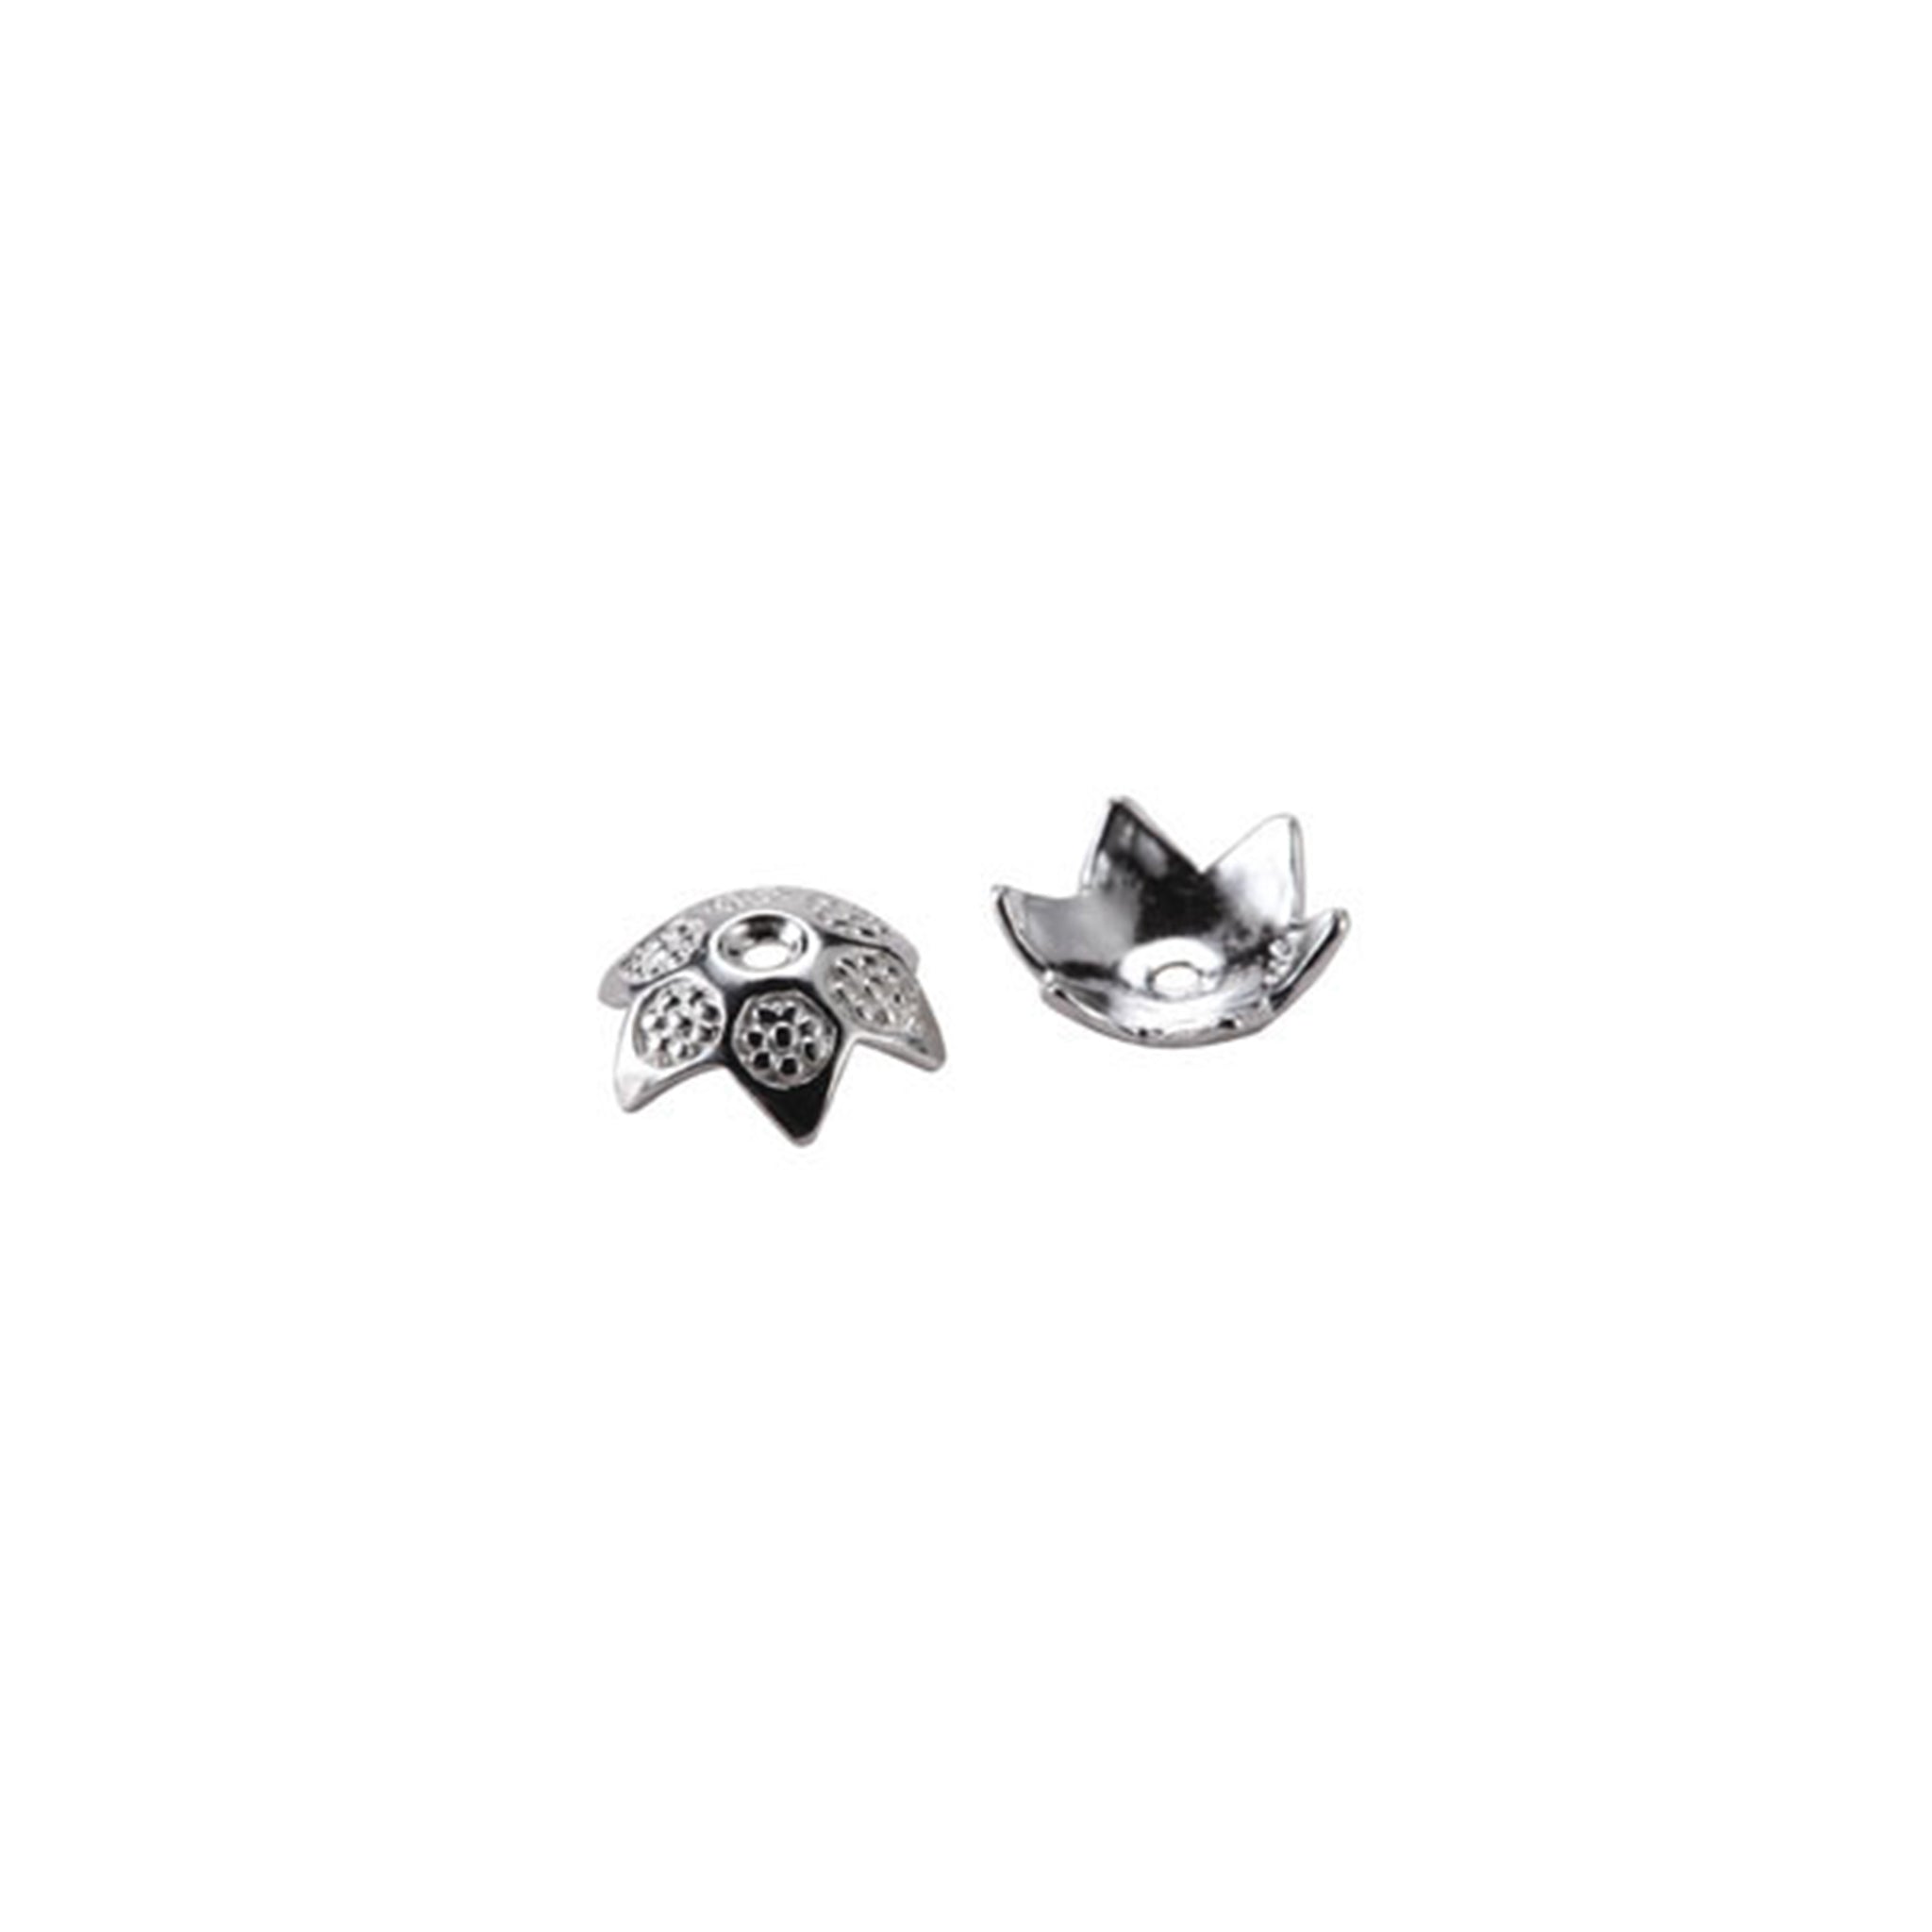 Rosette Star Scalloped Bead Cap in Sterling Silver 10.5x1.2mm